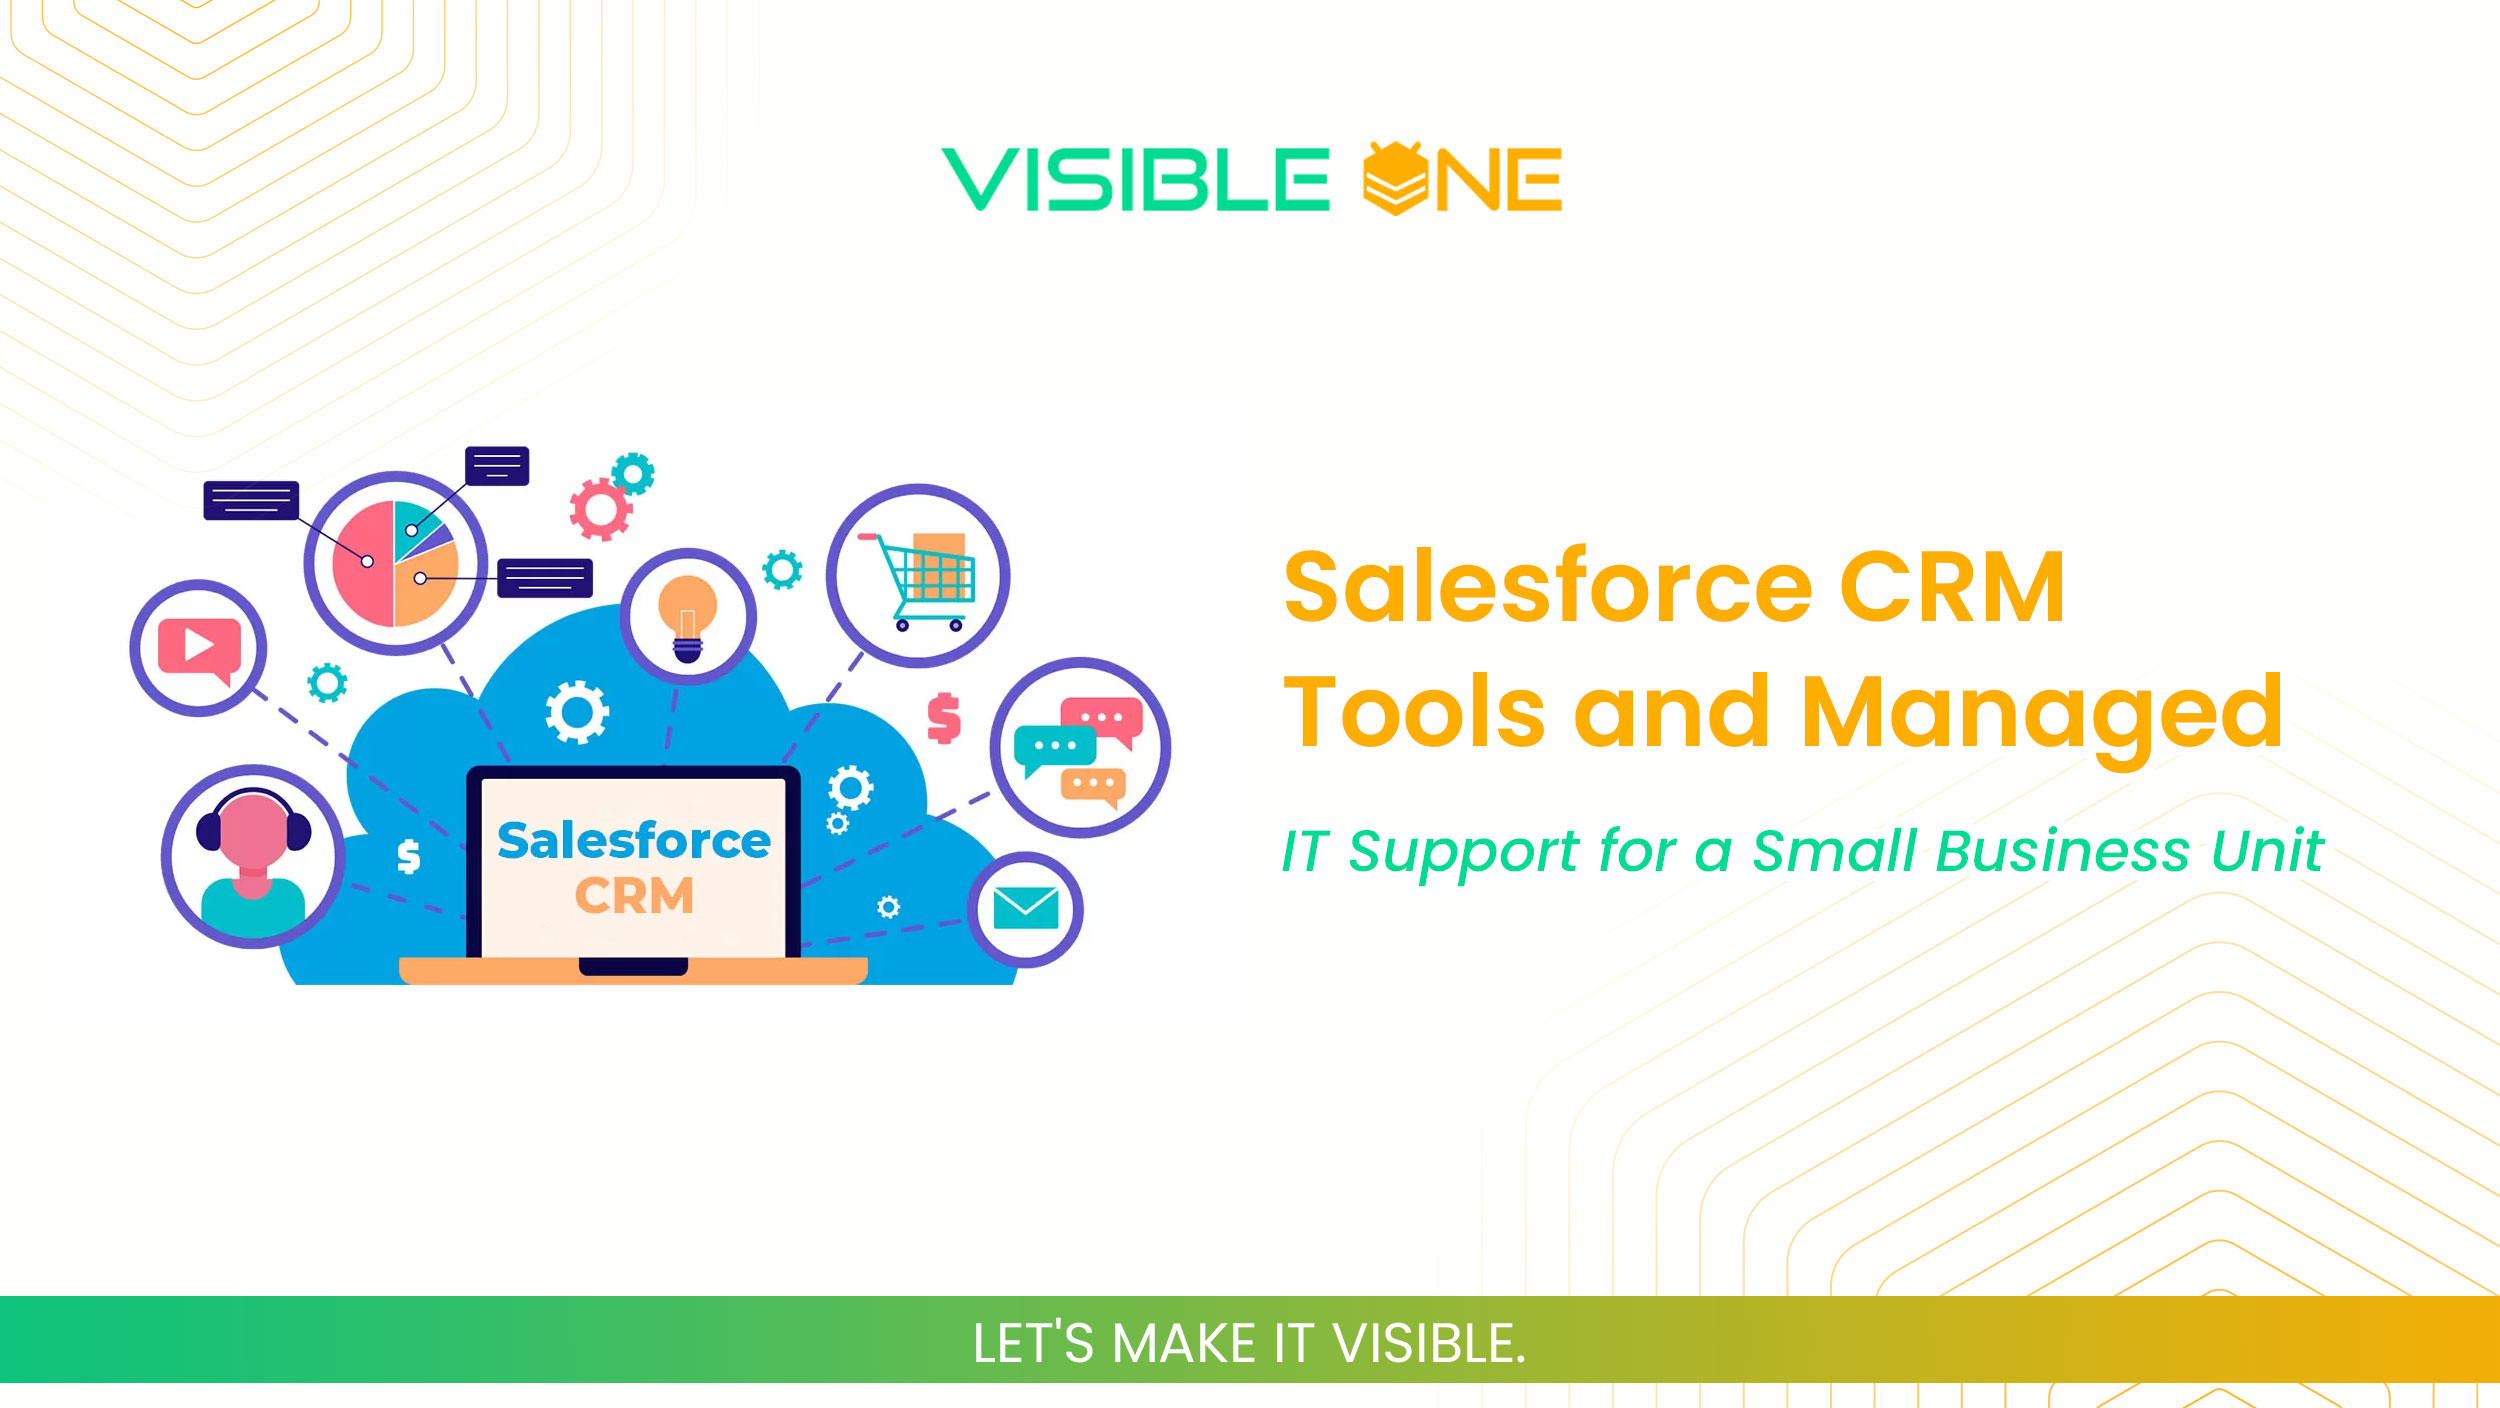 Salesforce CRM Tools and Managed IT Support for a Small Business Unit